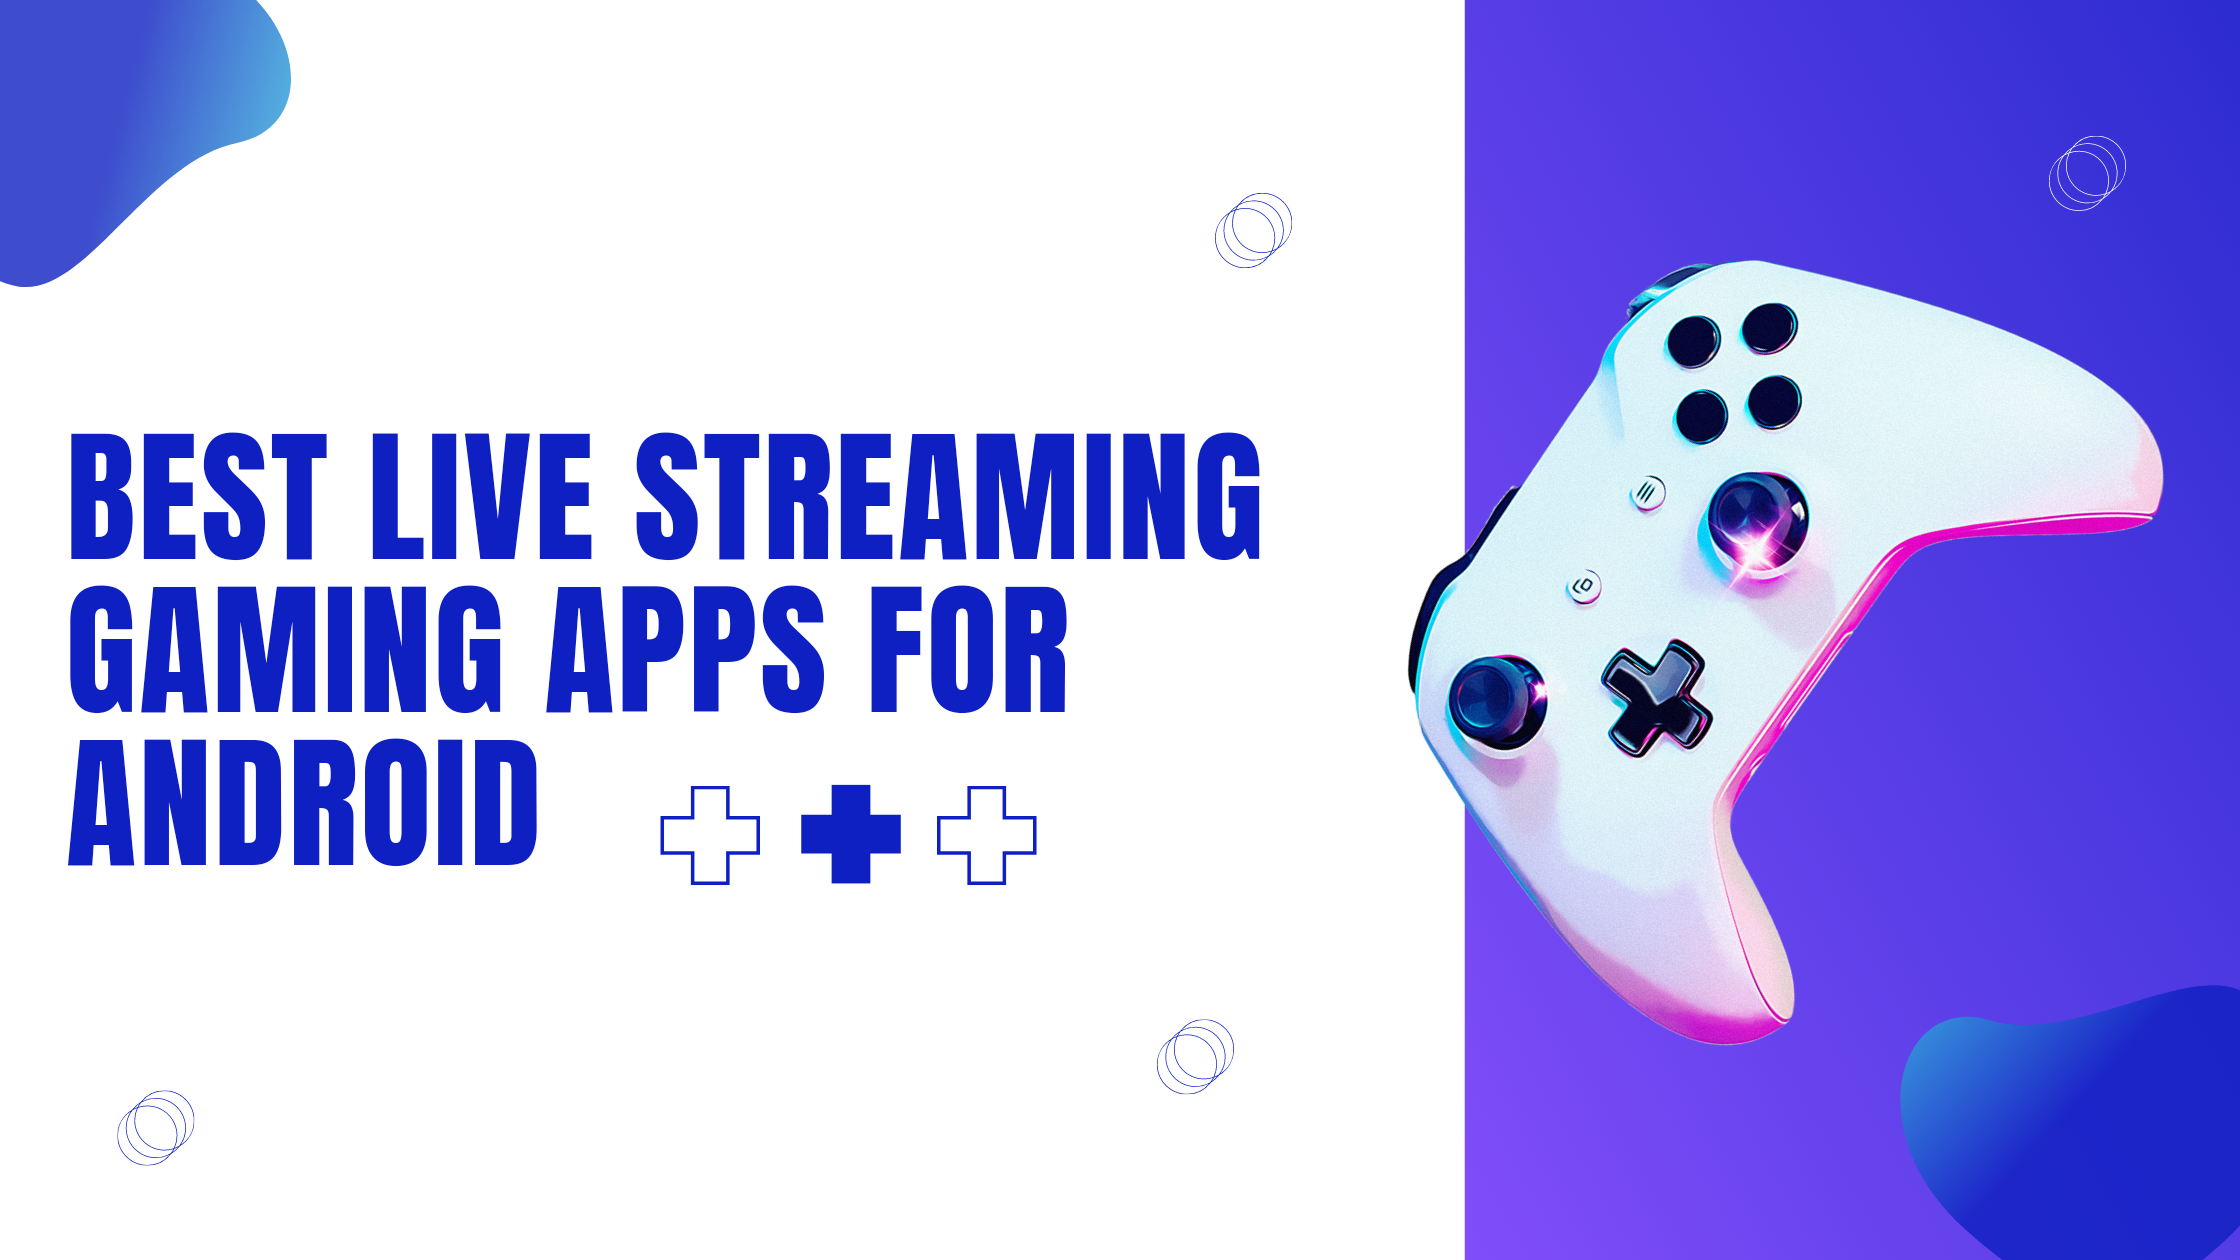 Best live streaming gaming apps for Android